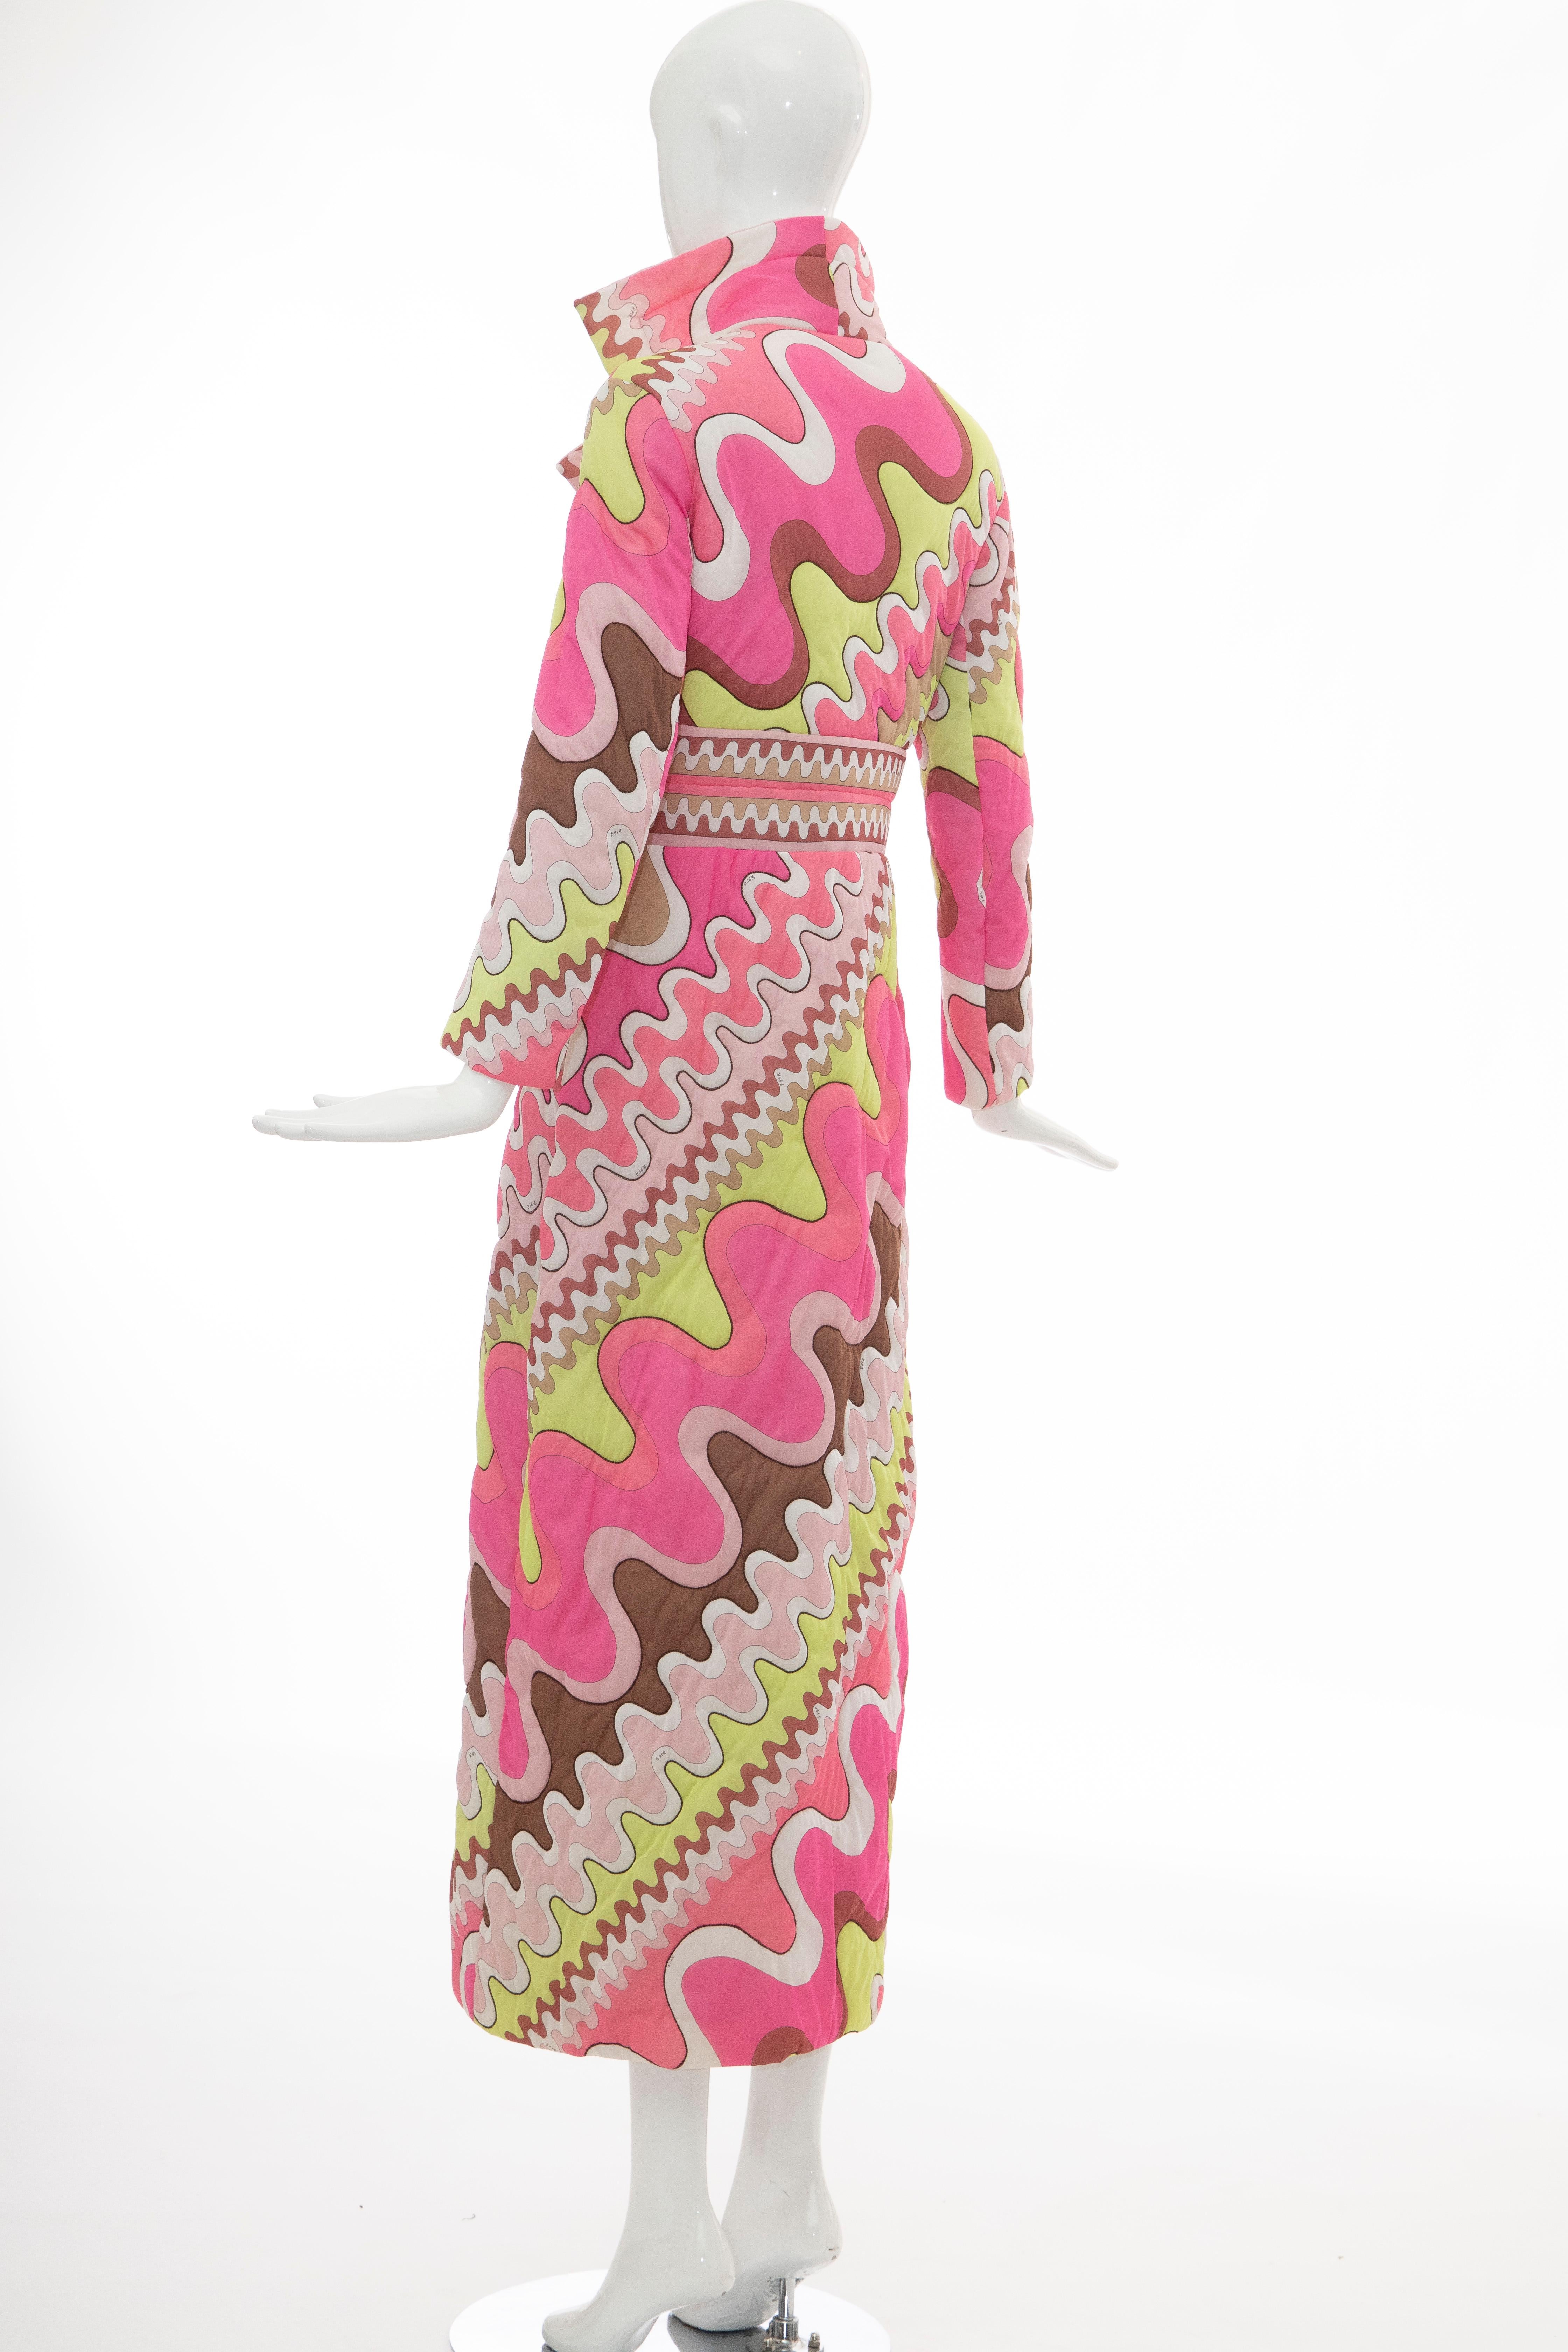 Emilio Pucci Double-Breasted Abstract Print Quilted Coat, Circa: 1970's 3